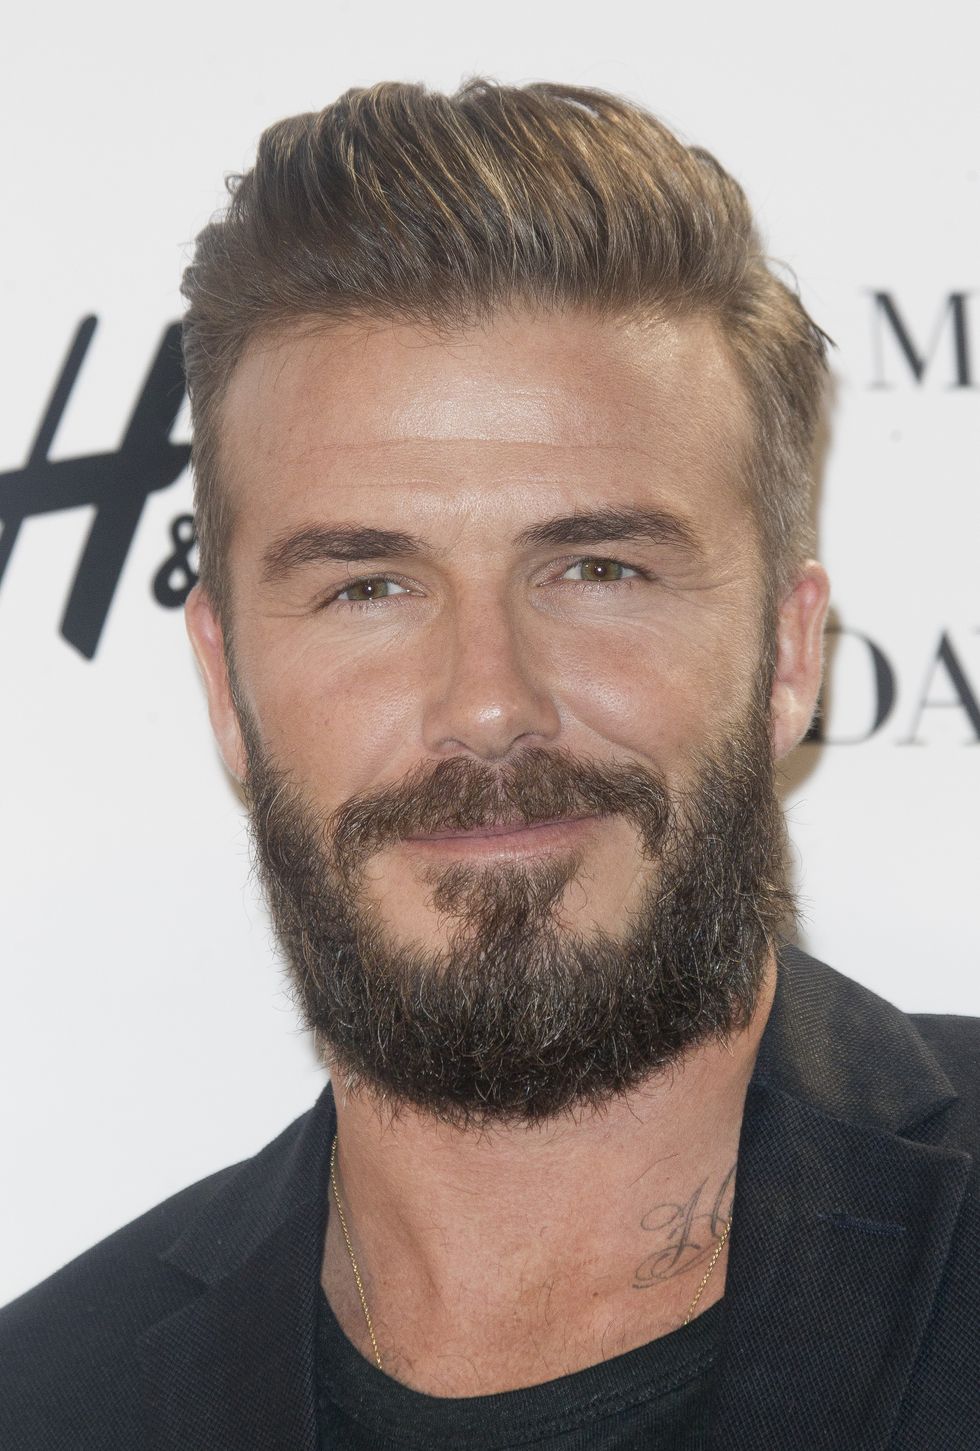 8 CelebrityApproved Beard Styles Thatll Get You Tonnes Of DMs On Instagram  Instantly